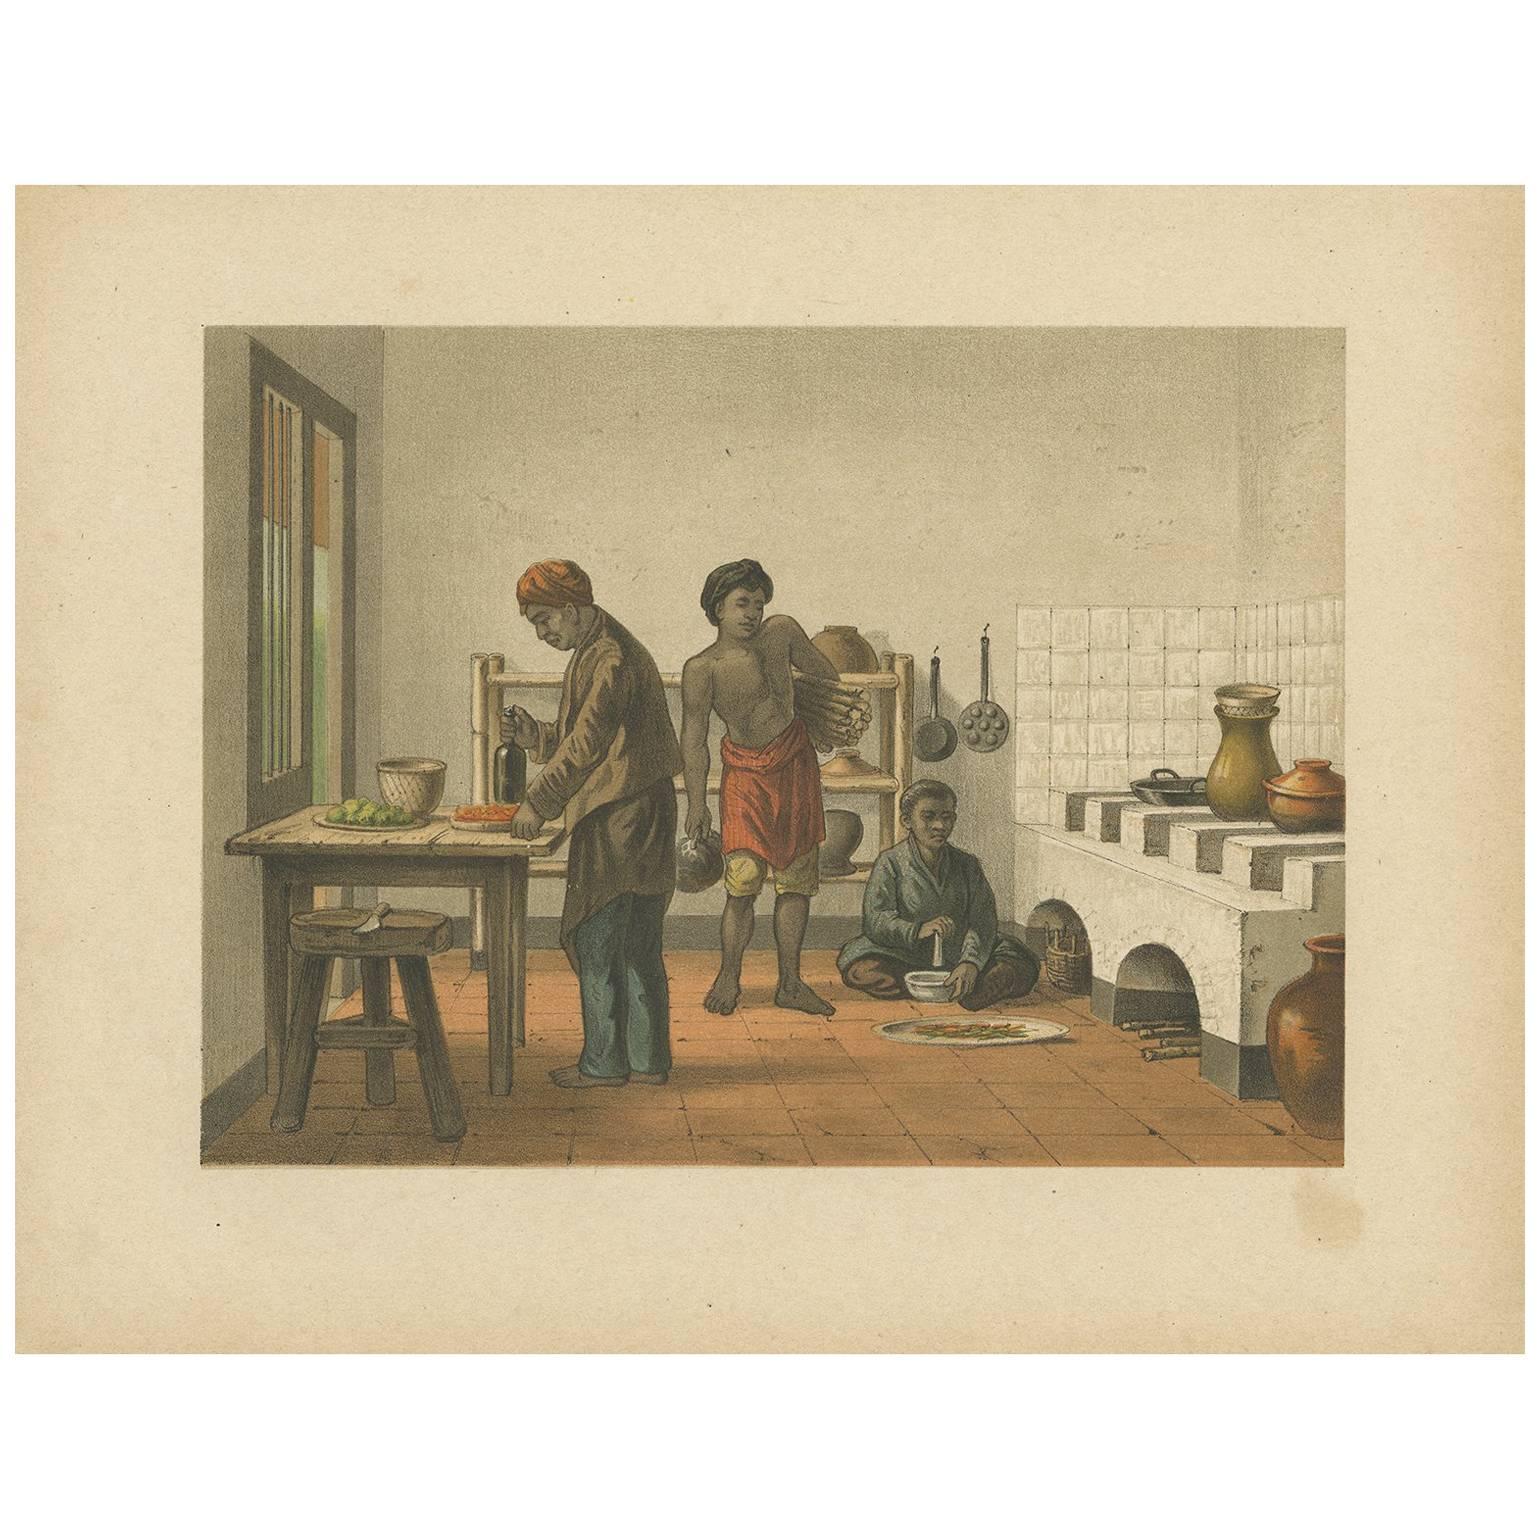 Antique Print of a Kitchen in Batavia by M.T.H. Perelaer, 1888